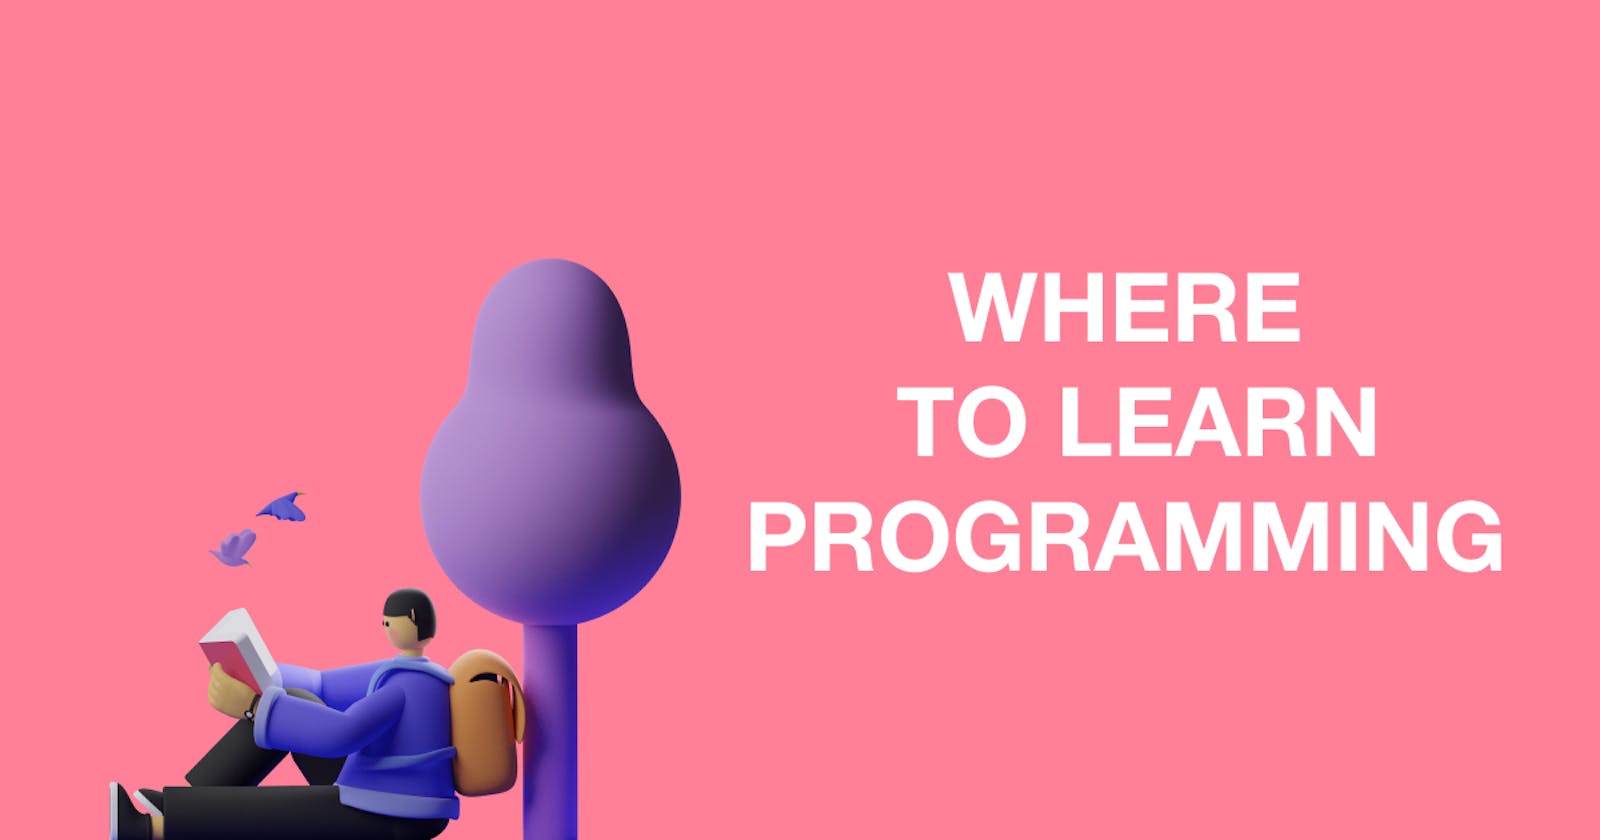 Where to learn programming Or Get New Skills?